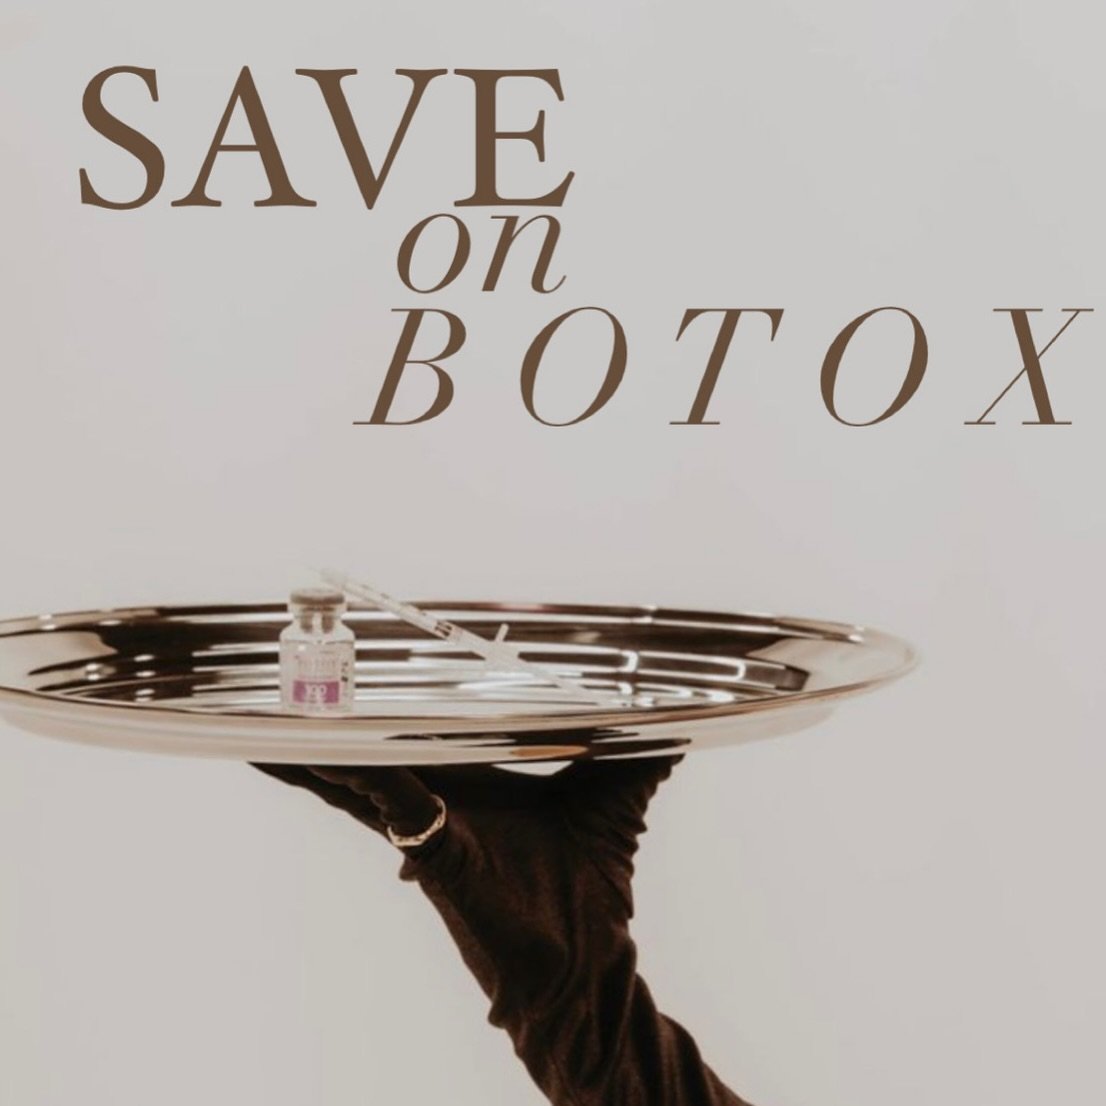 KISS THOSE WRINKLES GOODBYE ✌️ SAVE $50 - PLUS -
RECEIVE ADDITIONAL SAVINGS WITH ALLE AND XPERIENCE+ REWARDS! 

BOOK YOUR APPOINTMENT TODAY 🤎 

#aprildeals #botoxface #botox #goodbyewrinkles #theluxemedspa #atlantaga